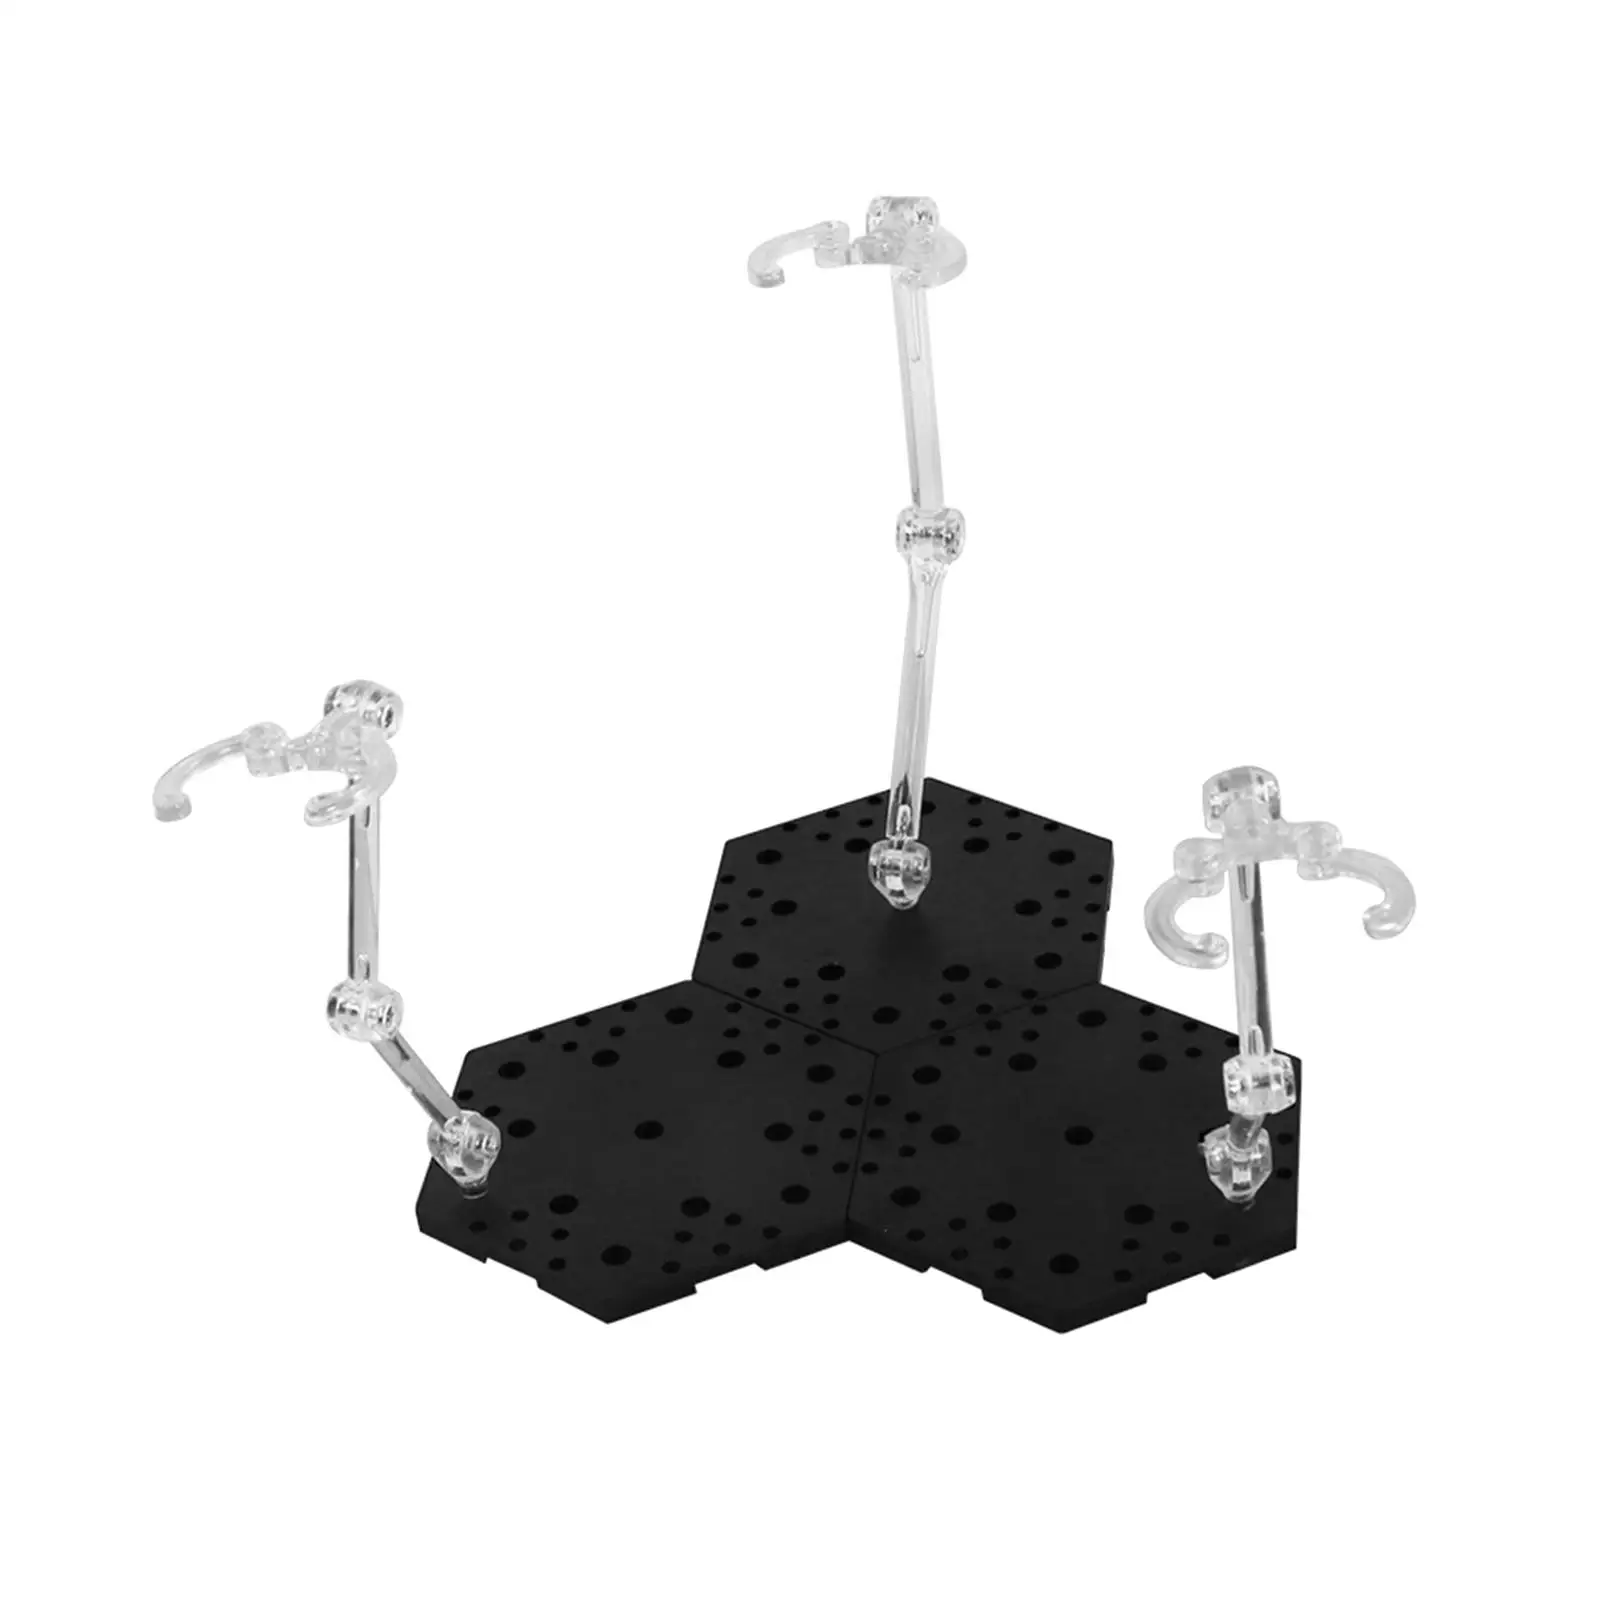 Figure Base Display Stand Rack for 1/144 Model DIY Accessories